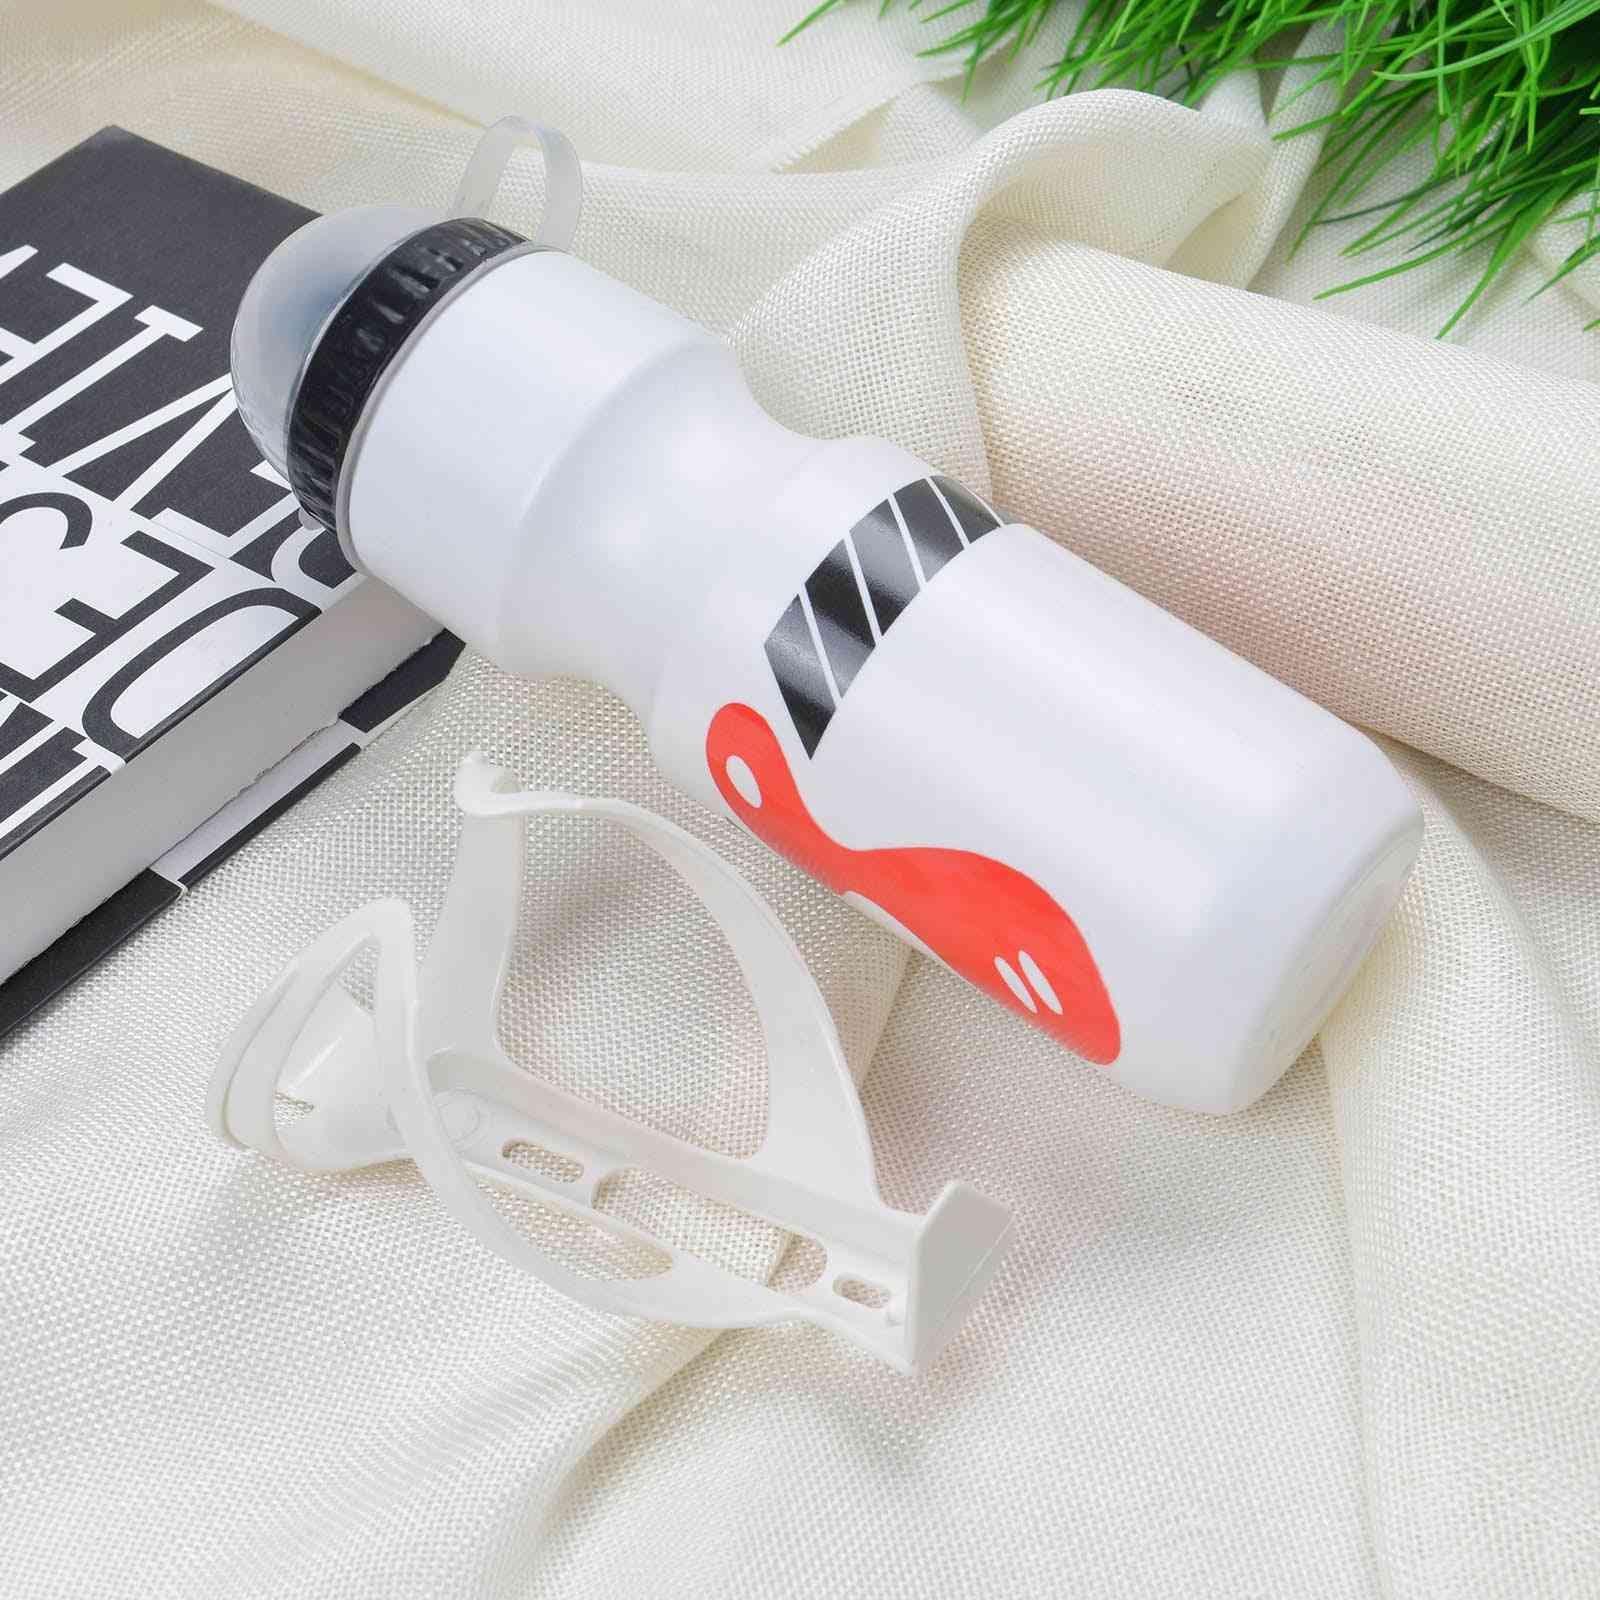 Mountain Bicycle Cycling Water Drink Bottle Holder